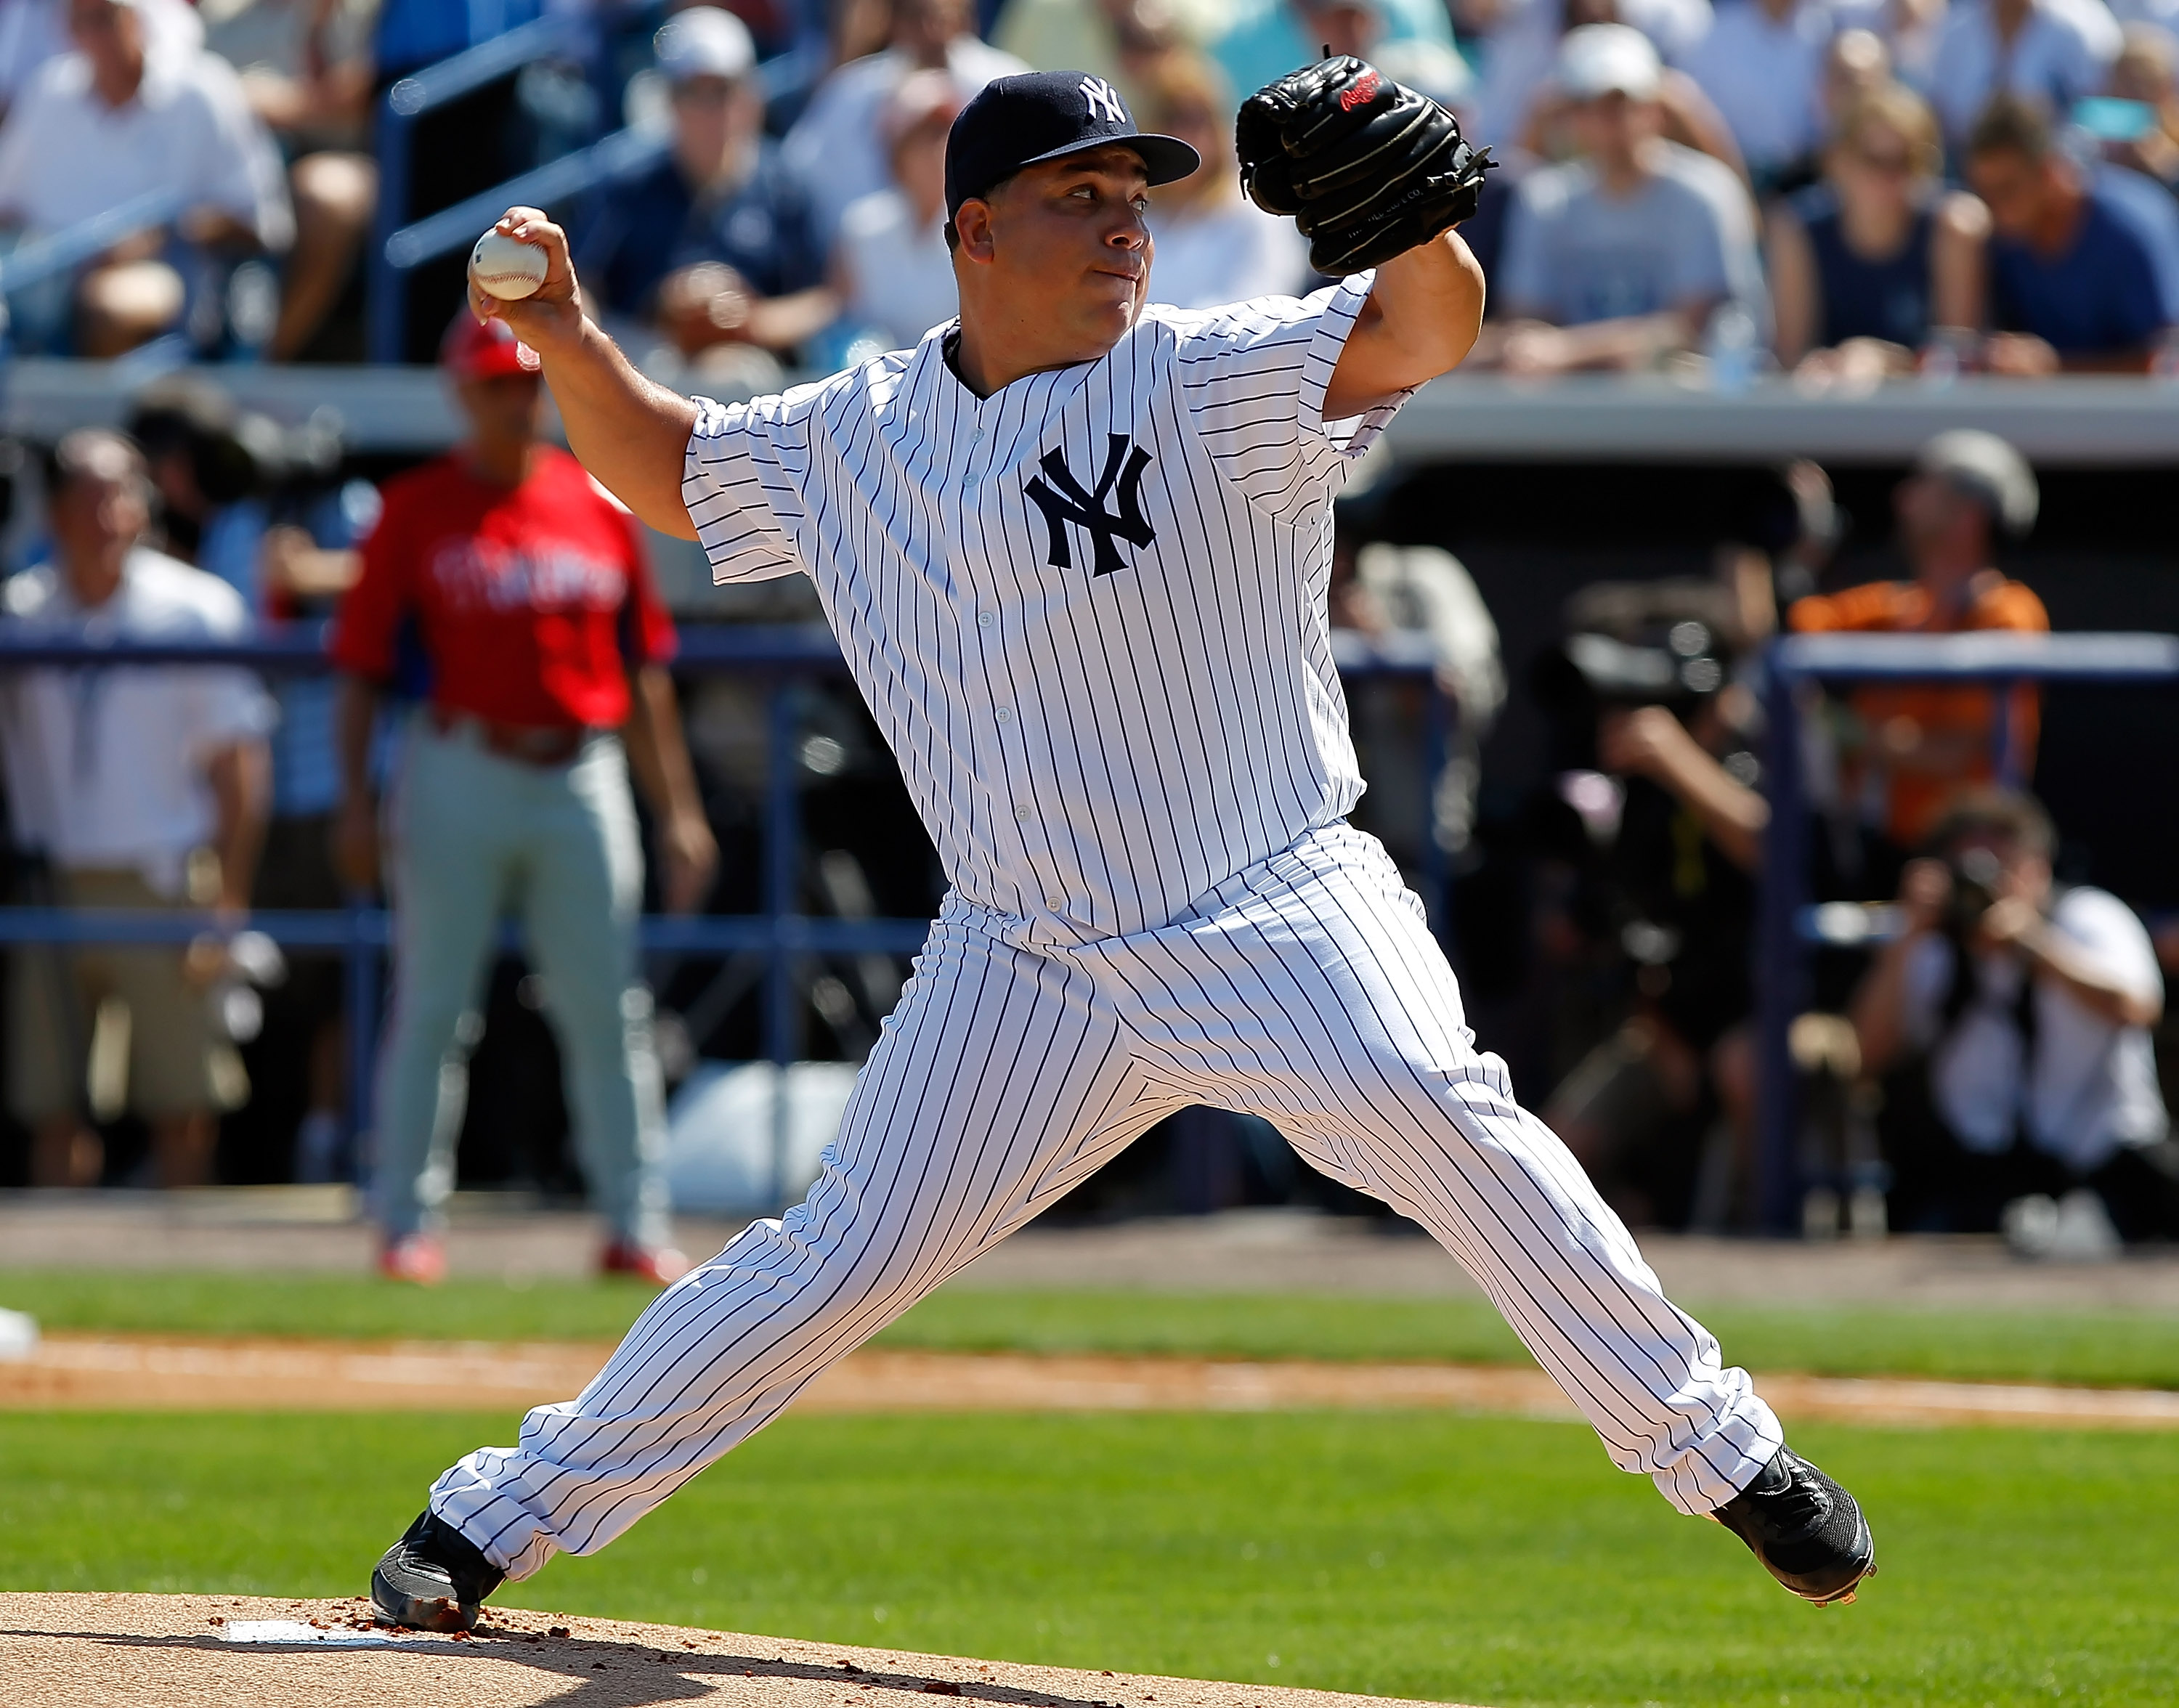 2011 MLB News: Bartolo Colon and the Filling of the New York